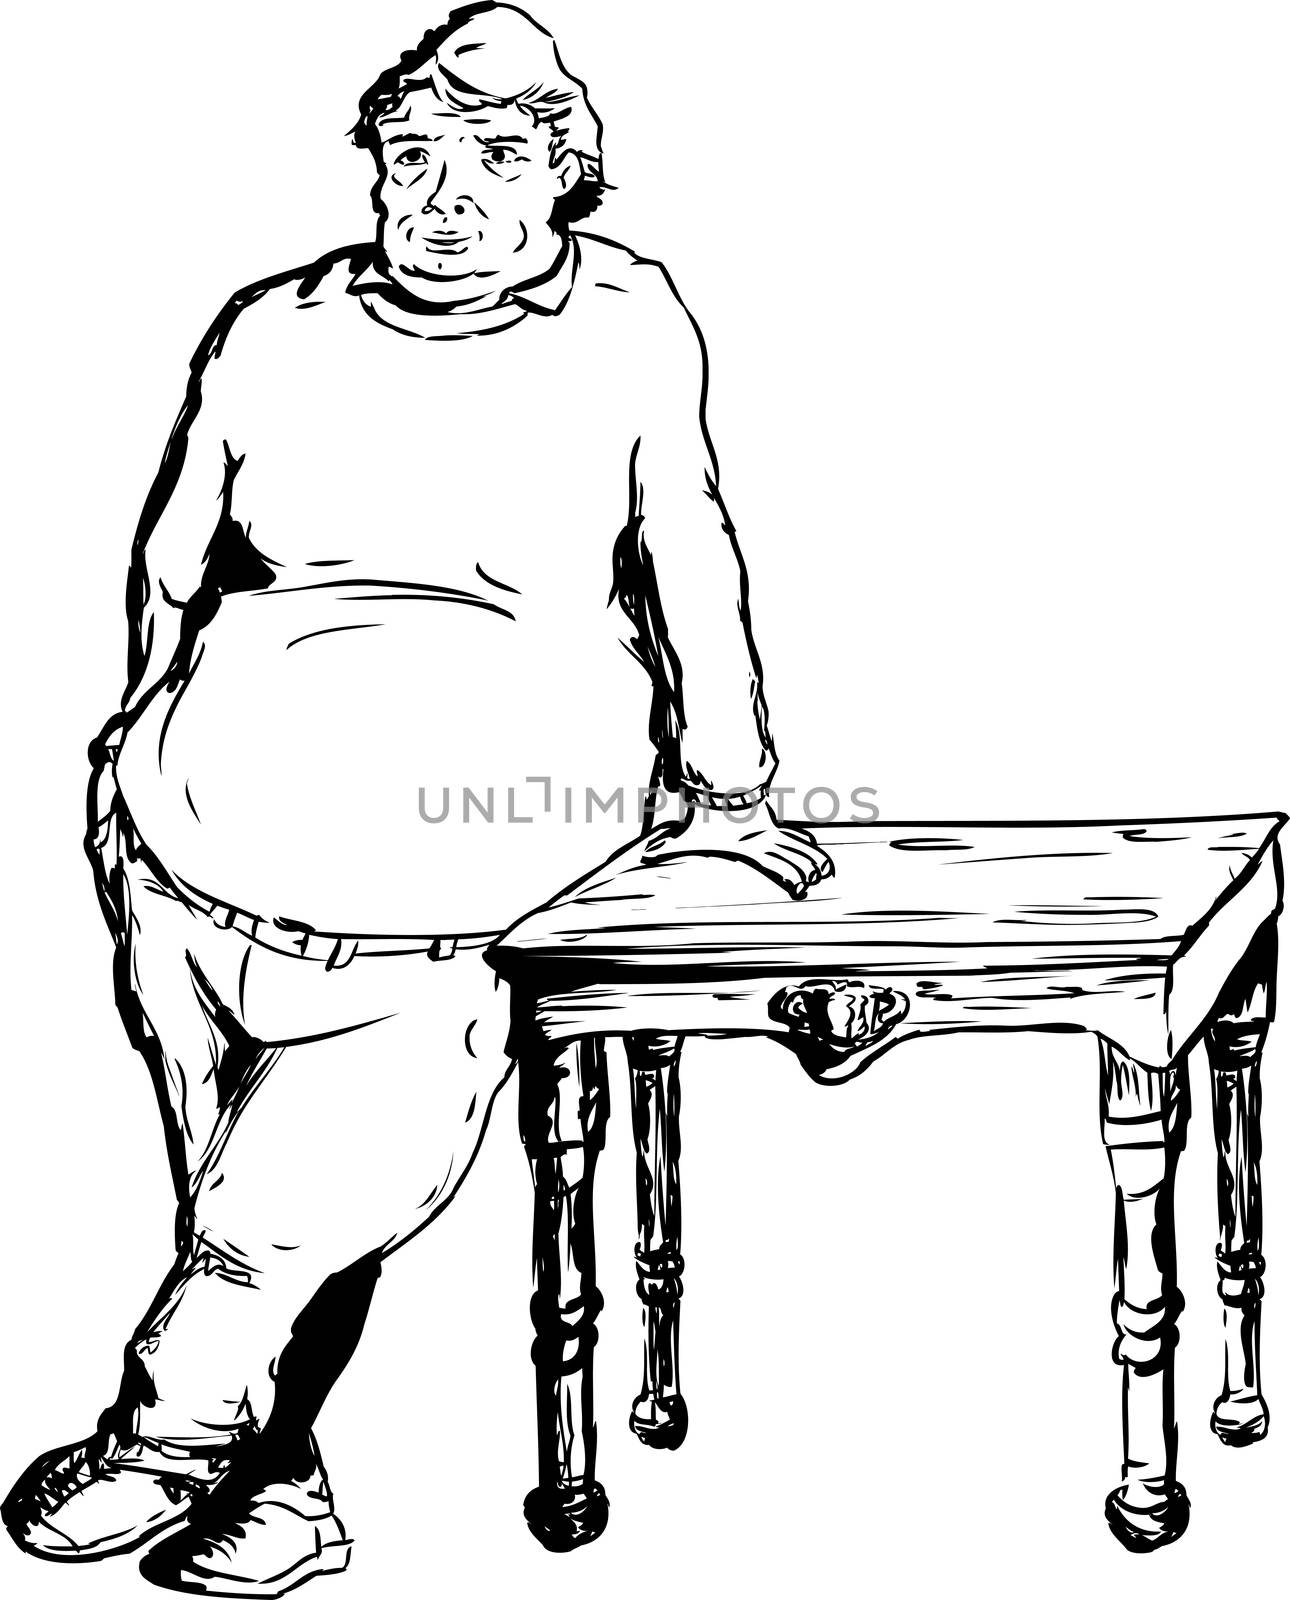 One calm overweight mature European male leaning on table with hand